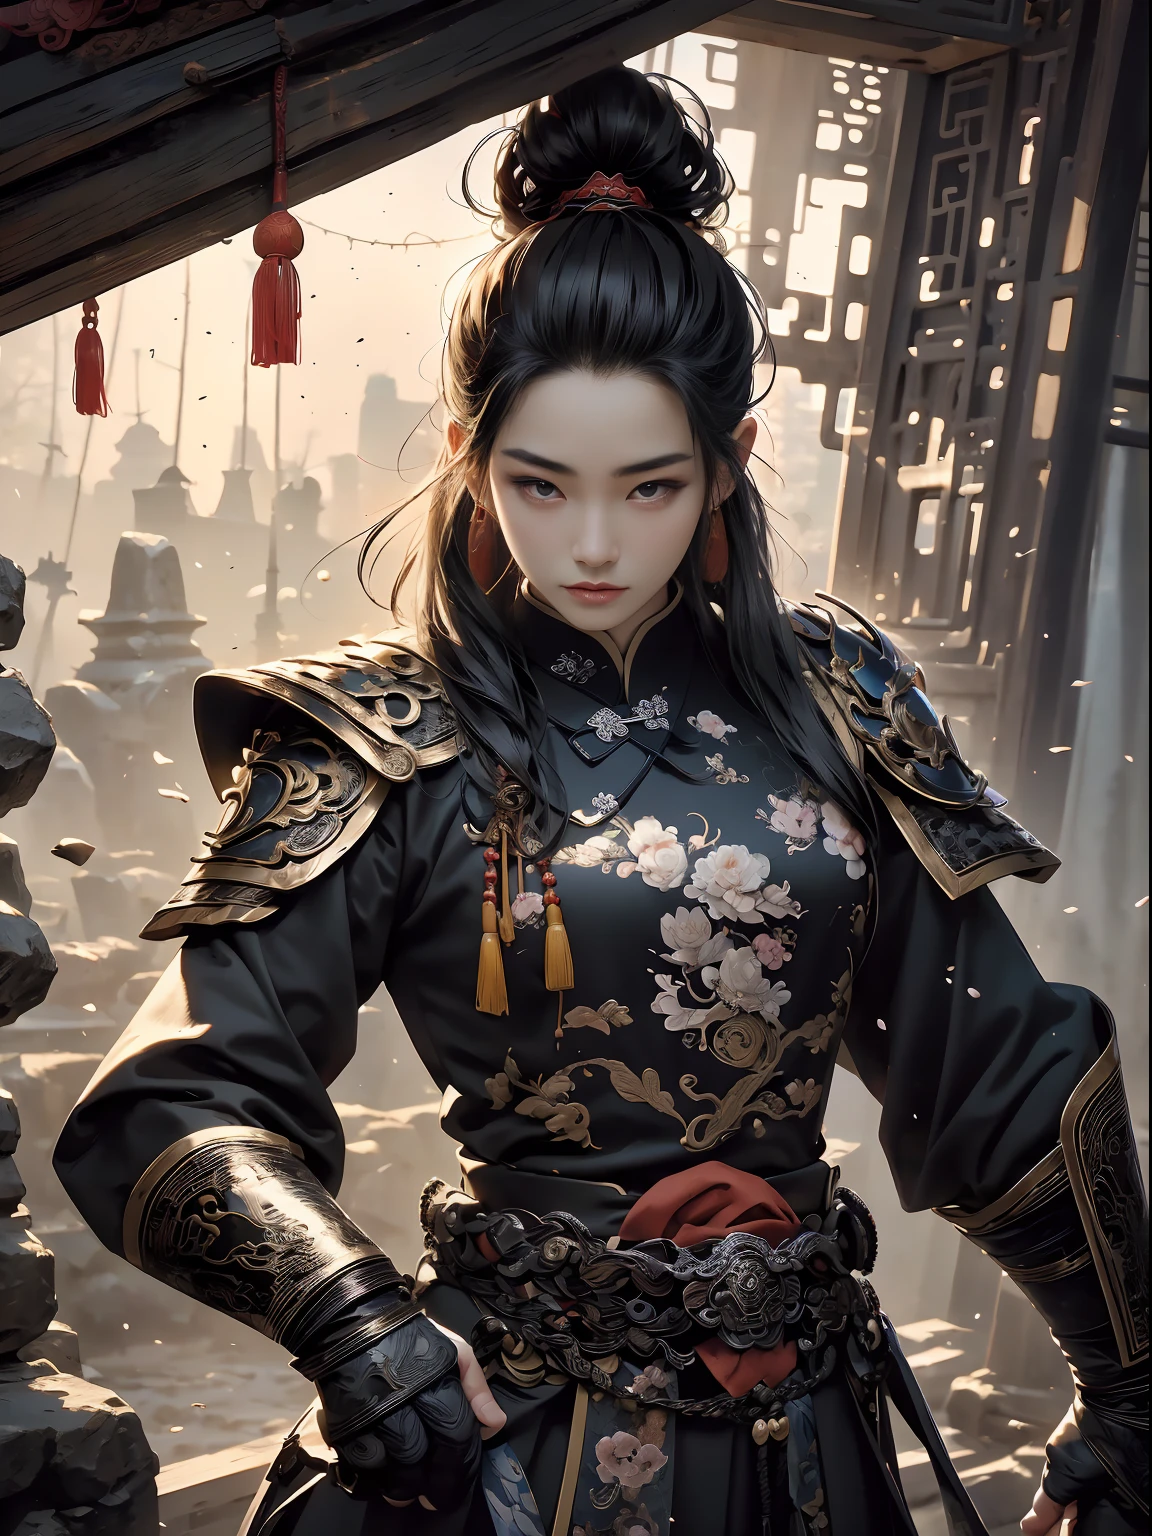 (((Chinese man))) best quality, very high resolution, detailed CG in 4K, masterpiece, woman, black hair, blue armor, Chinese people, Chinese tribes, Chinese city, forest, aesthetics, beautiful image, centered on screen , whole body